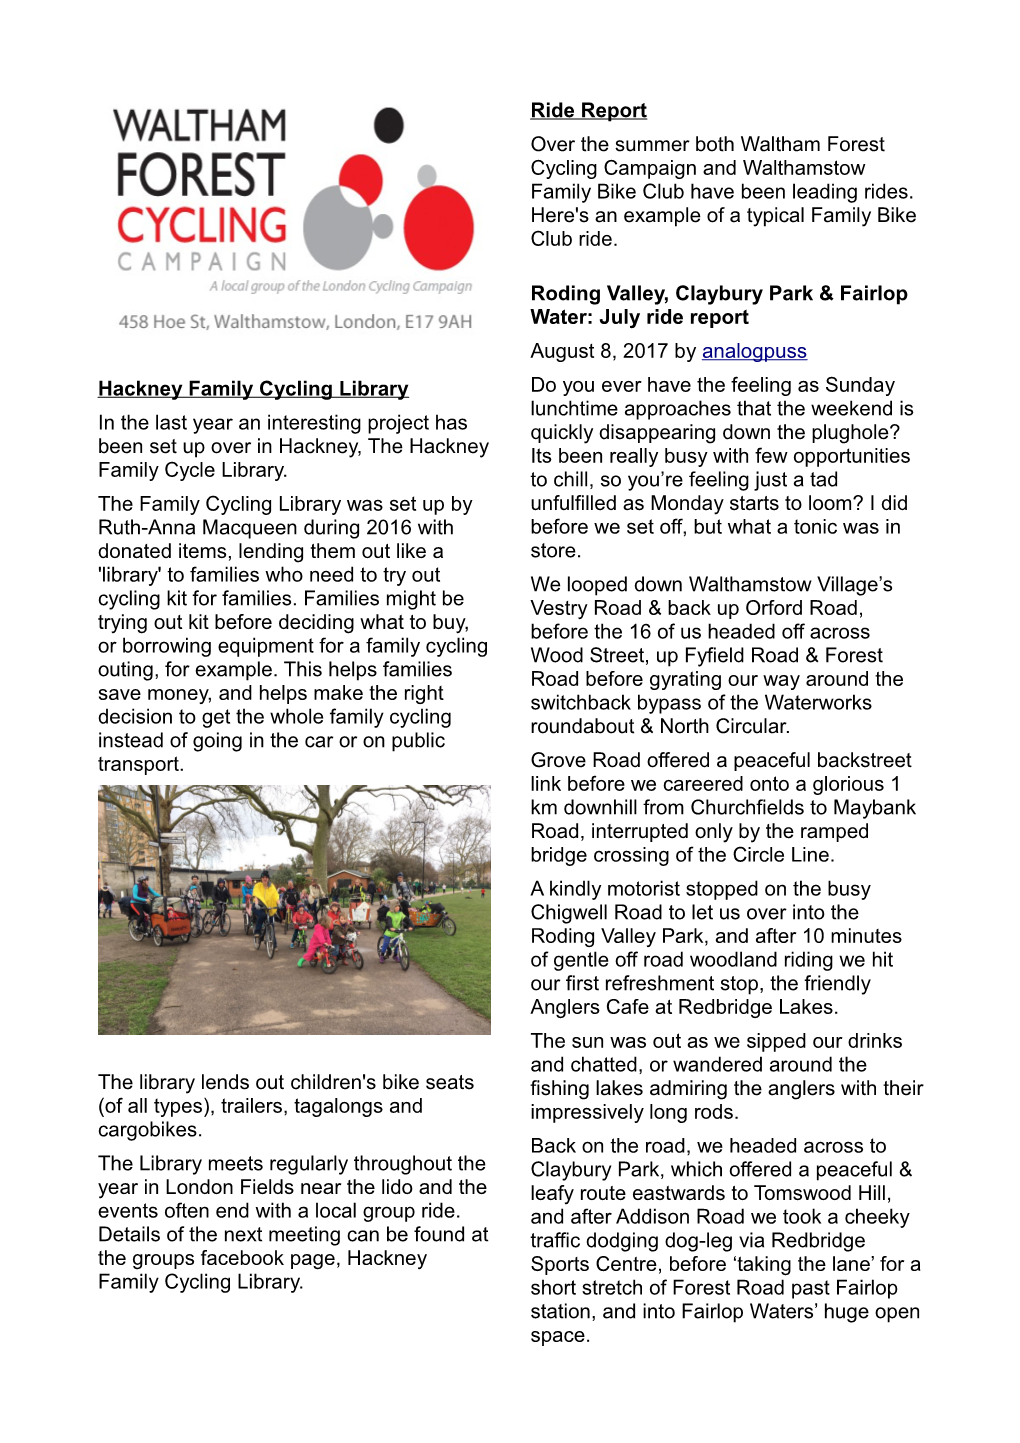 Hackney Family Cycling Library in the Last Year an Interesting Project Has